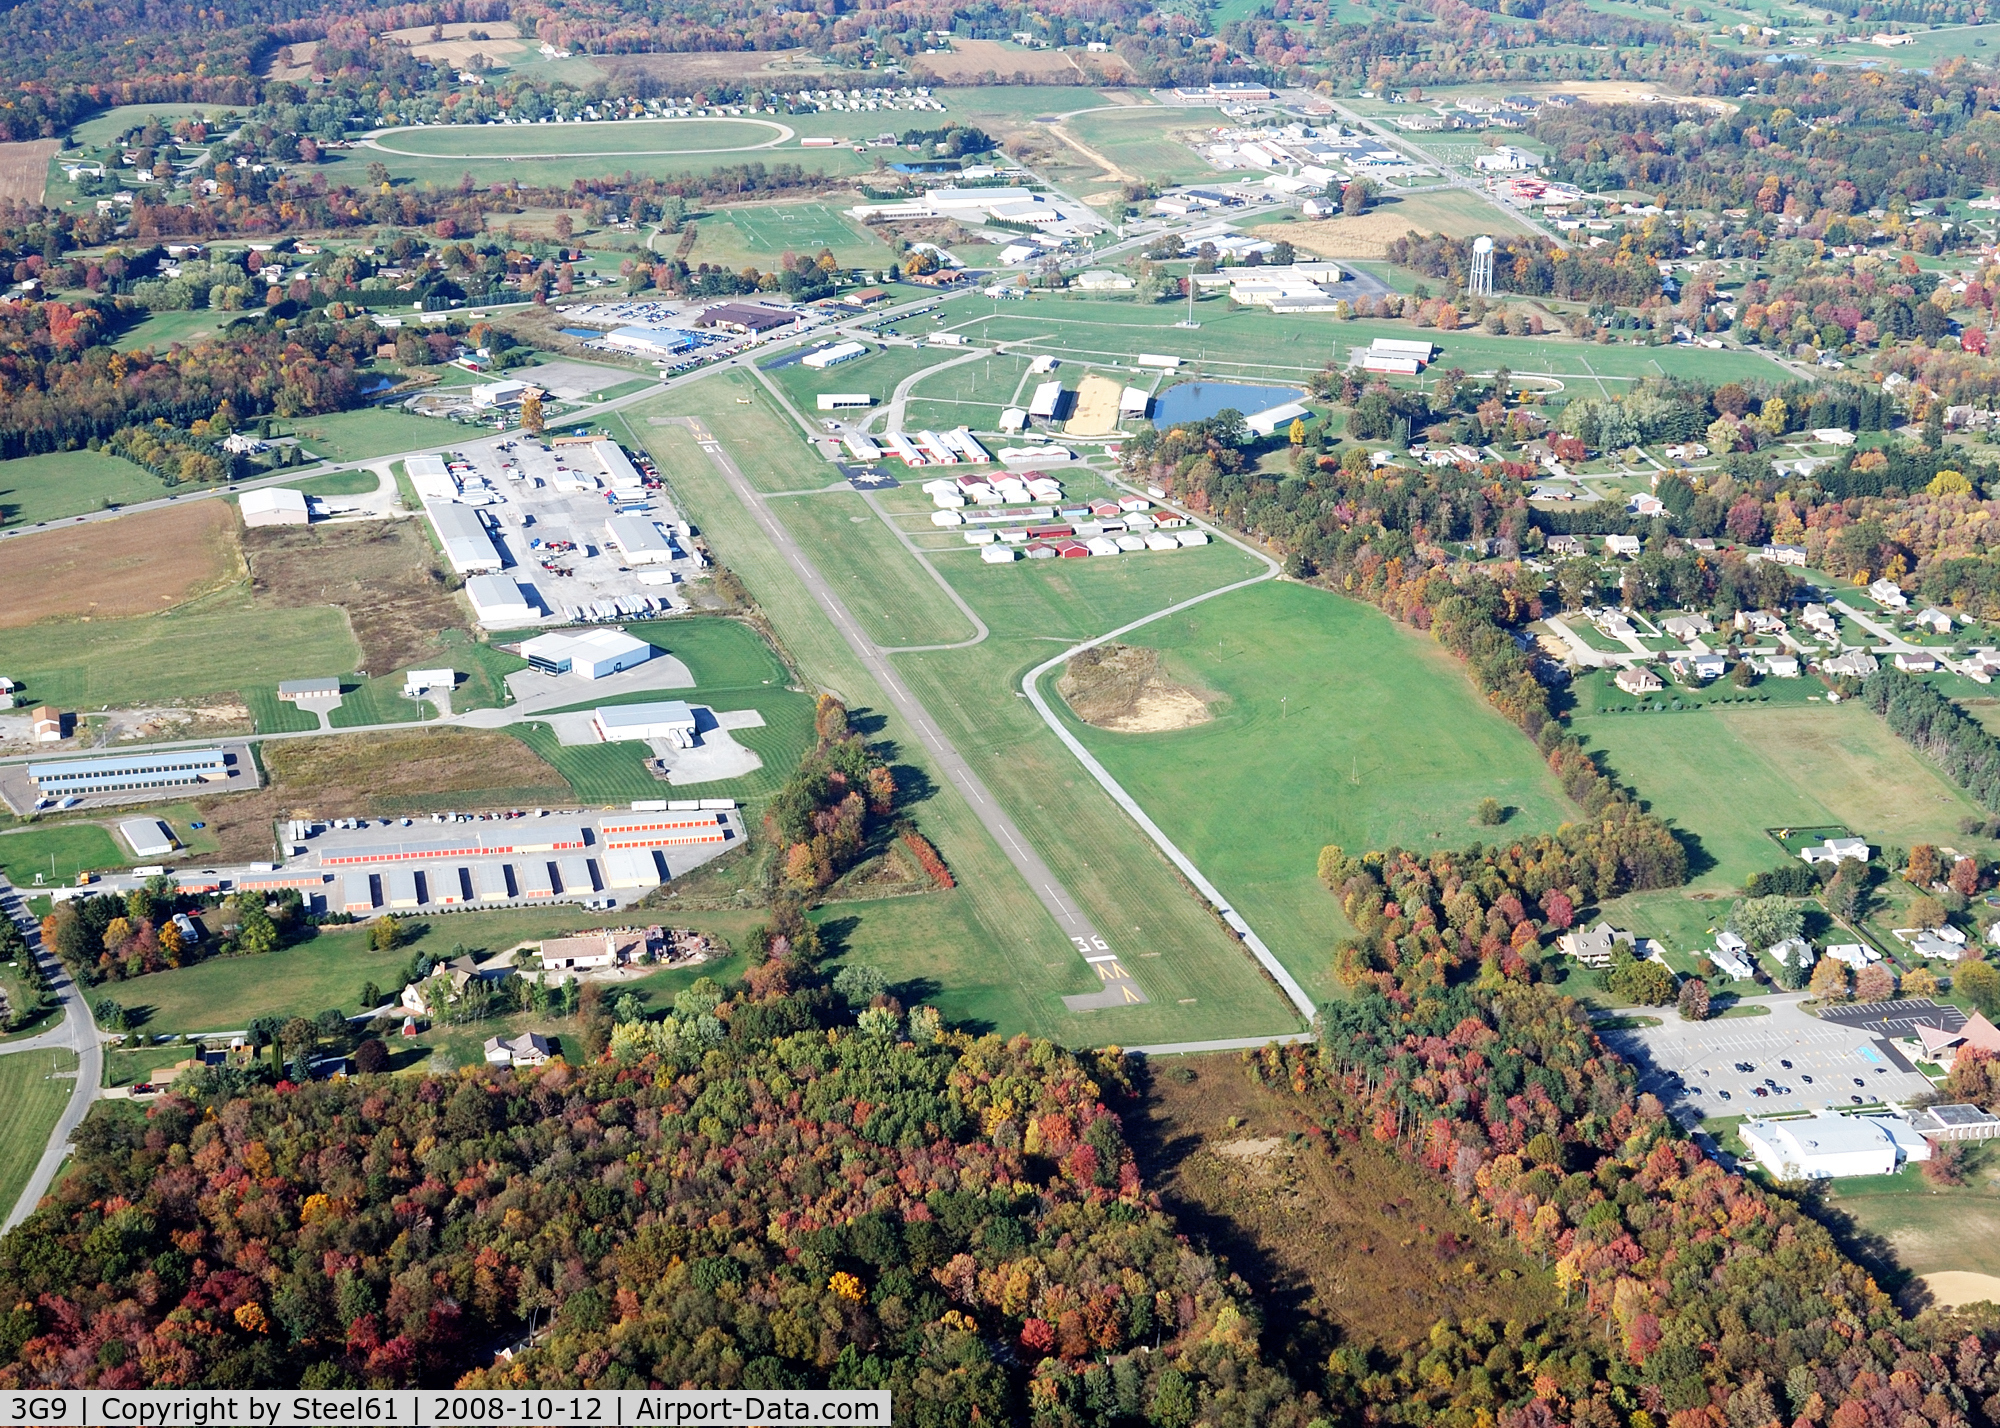 Butler Farm Show Airport (3G9) - Looking toward the north